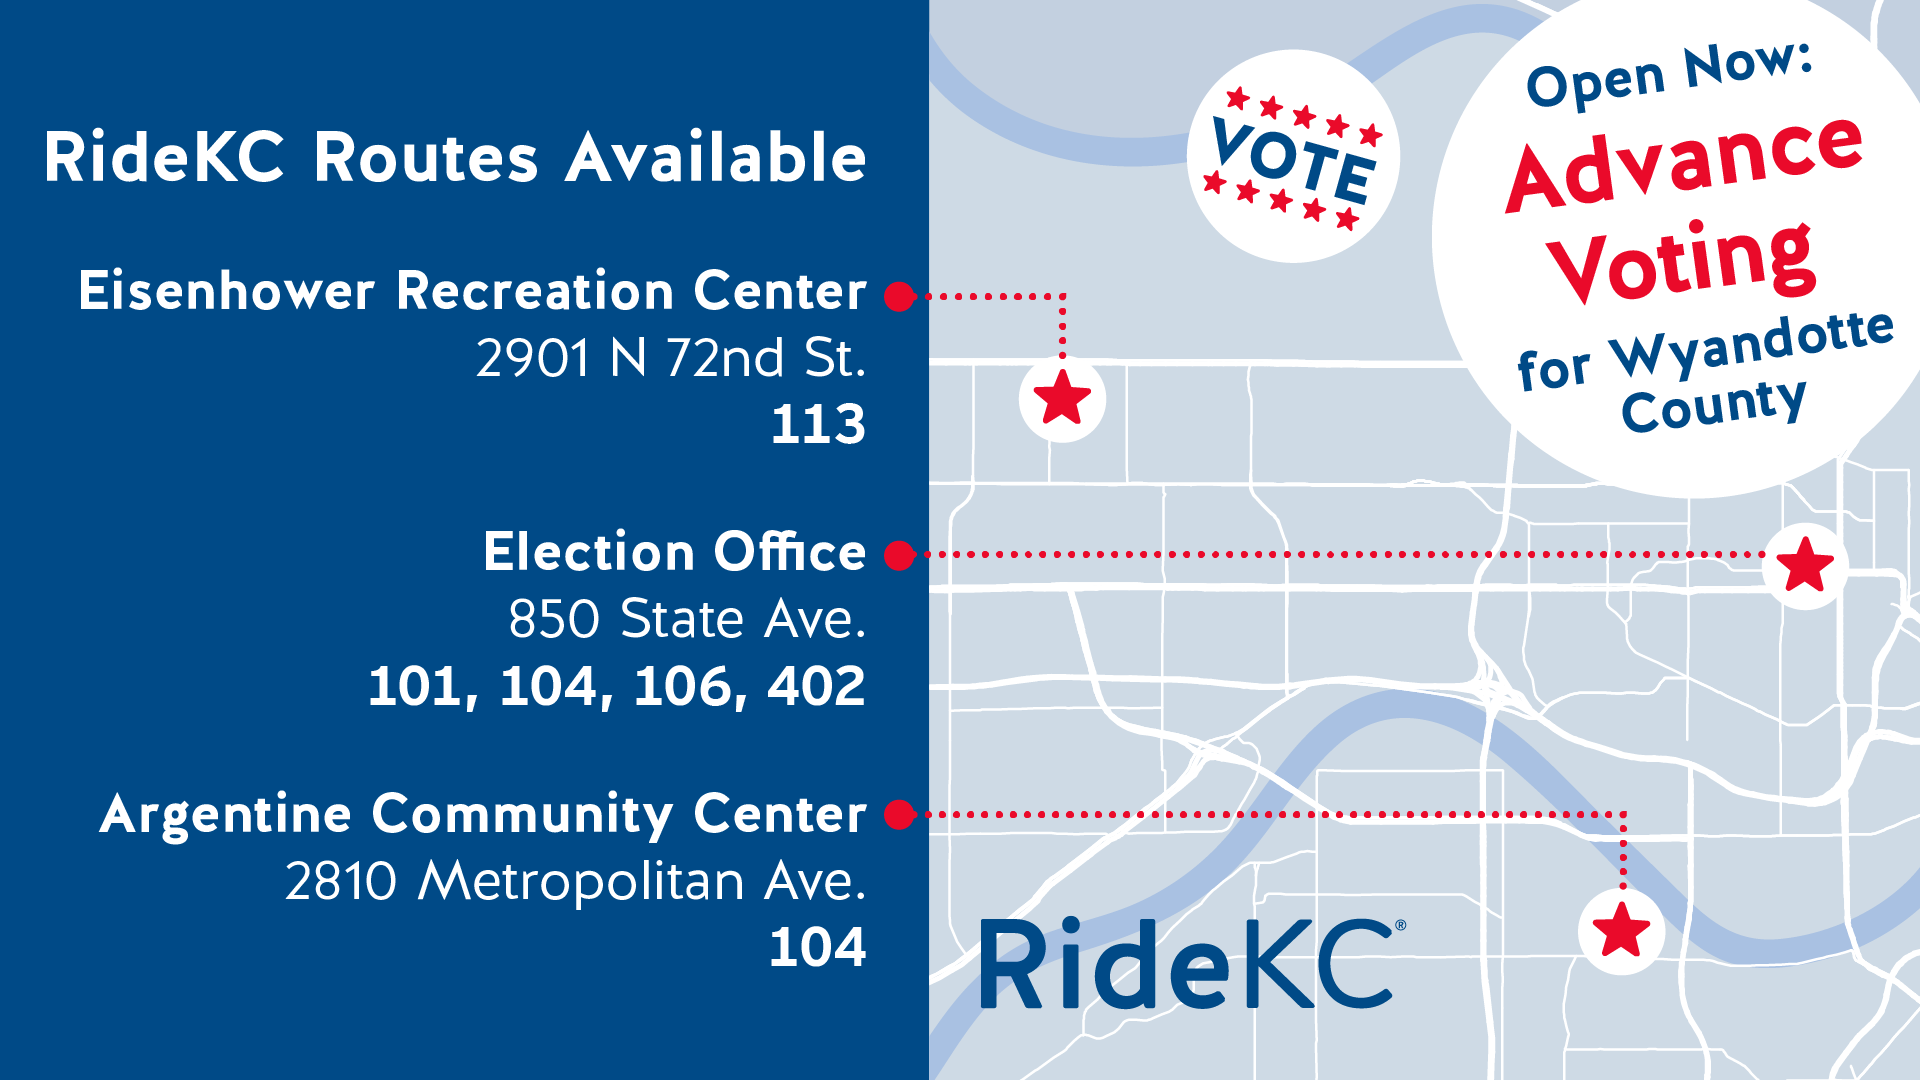 Wyandotte County advance voting locations with associated transit routes. 